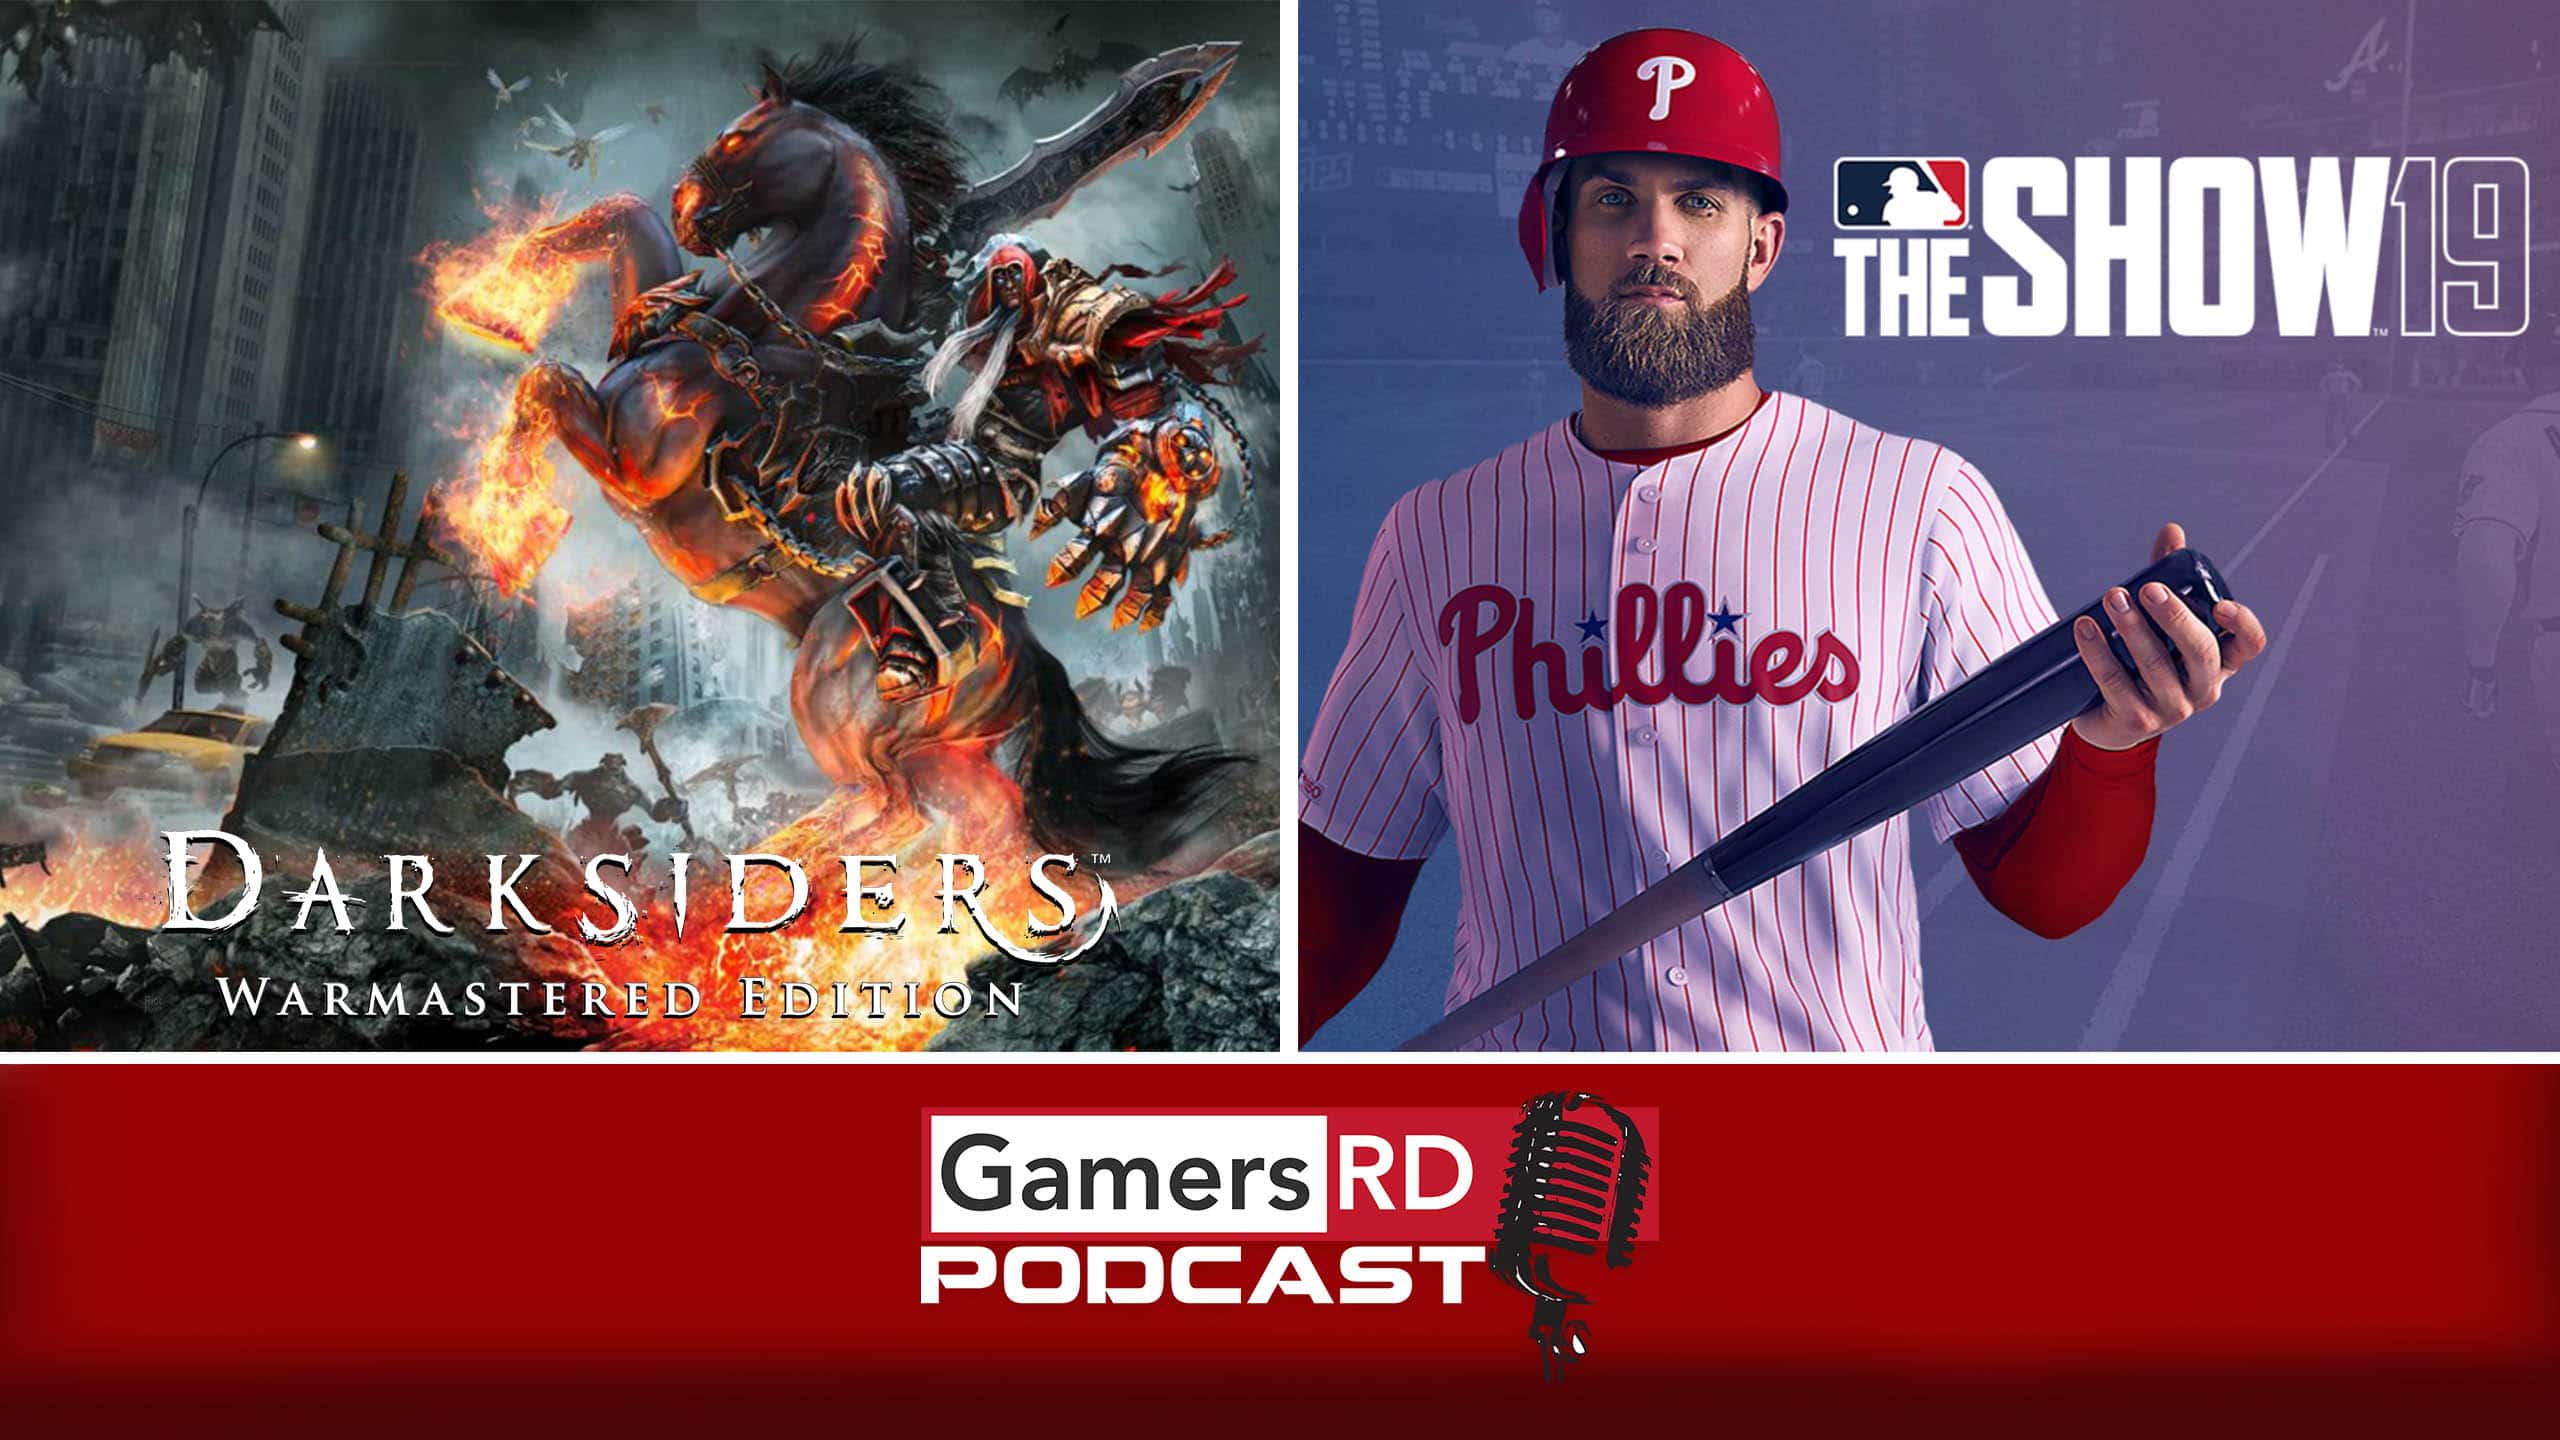 GamersRD Podcast #64, Darksiders Warmastered Edition Nintendo Switch & MLB The Show 19, PS4,Review